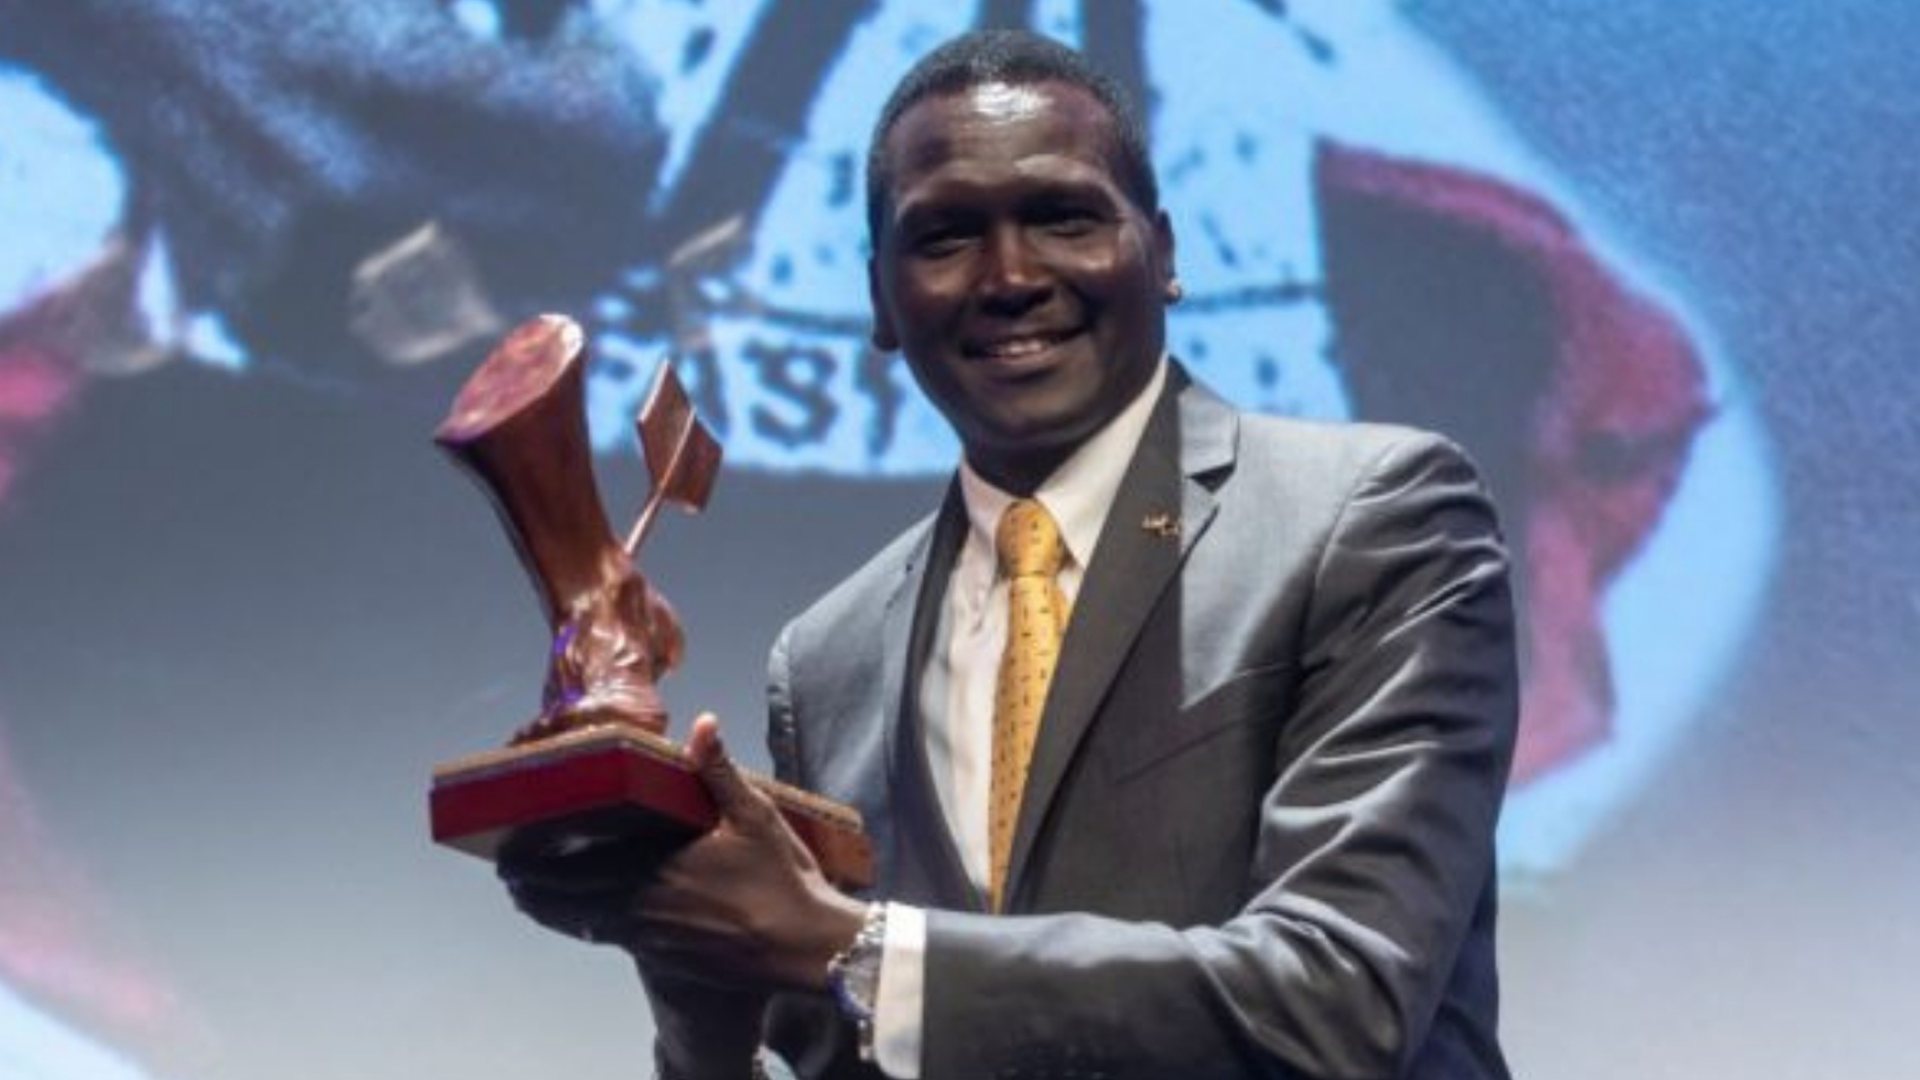 Paul Tergat receiving award for his accomplishments in Cross-country championships (In a file photo)